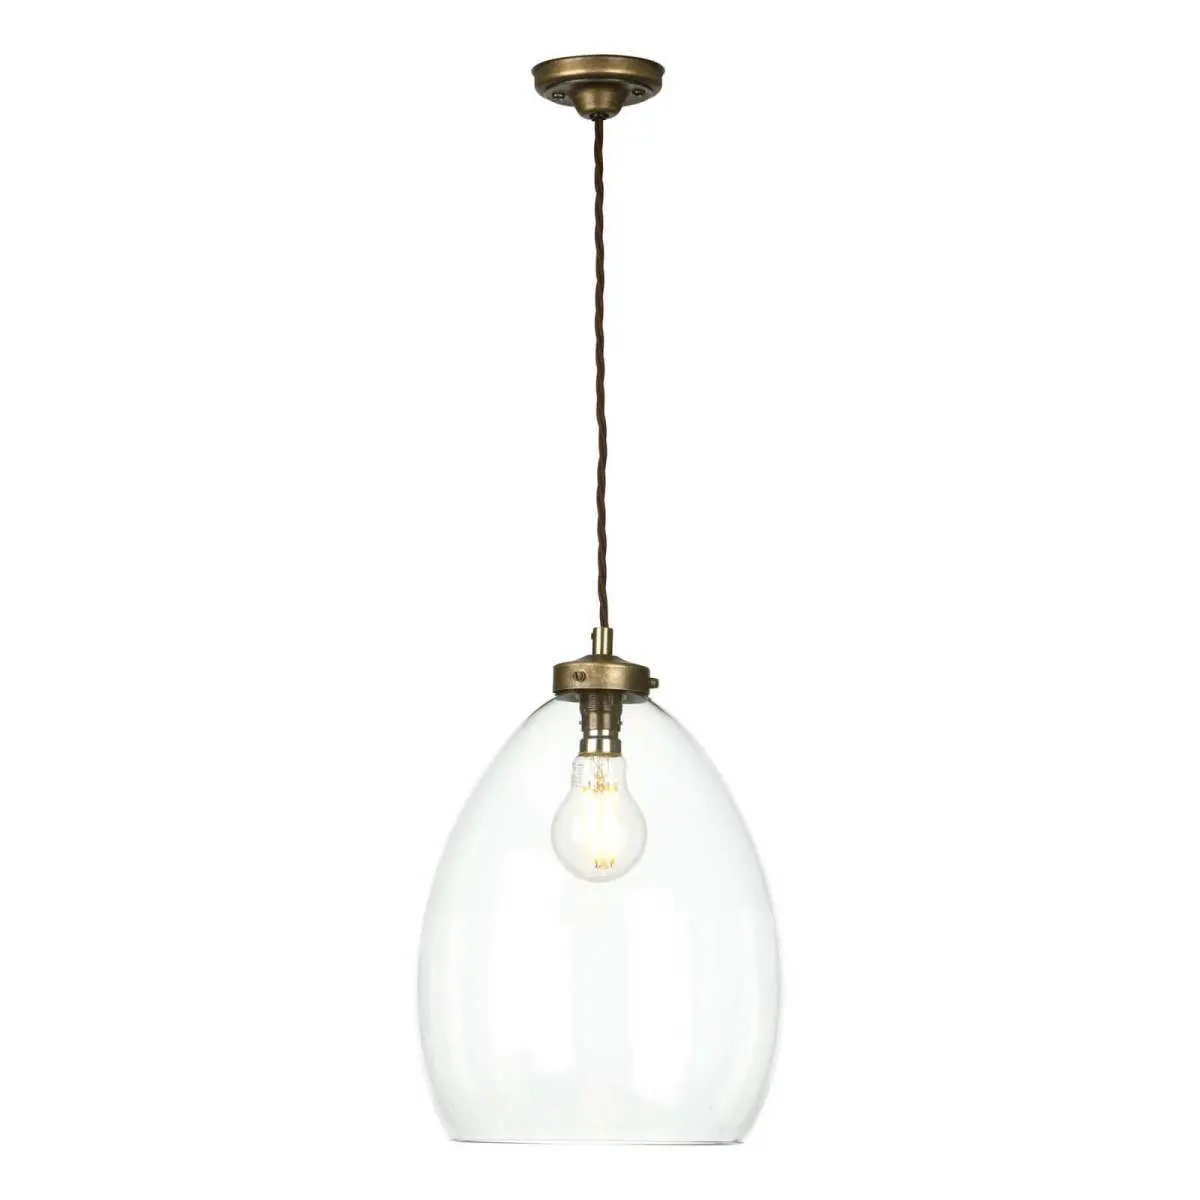 Yeovil single small pendant in antique brass